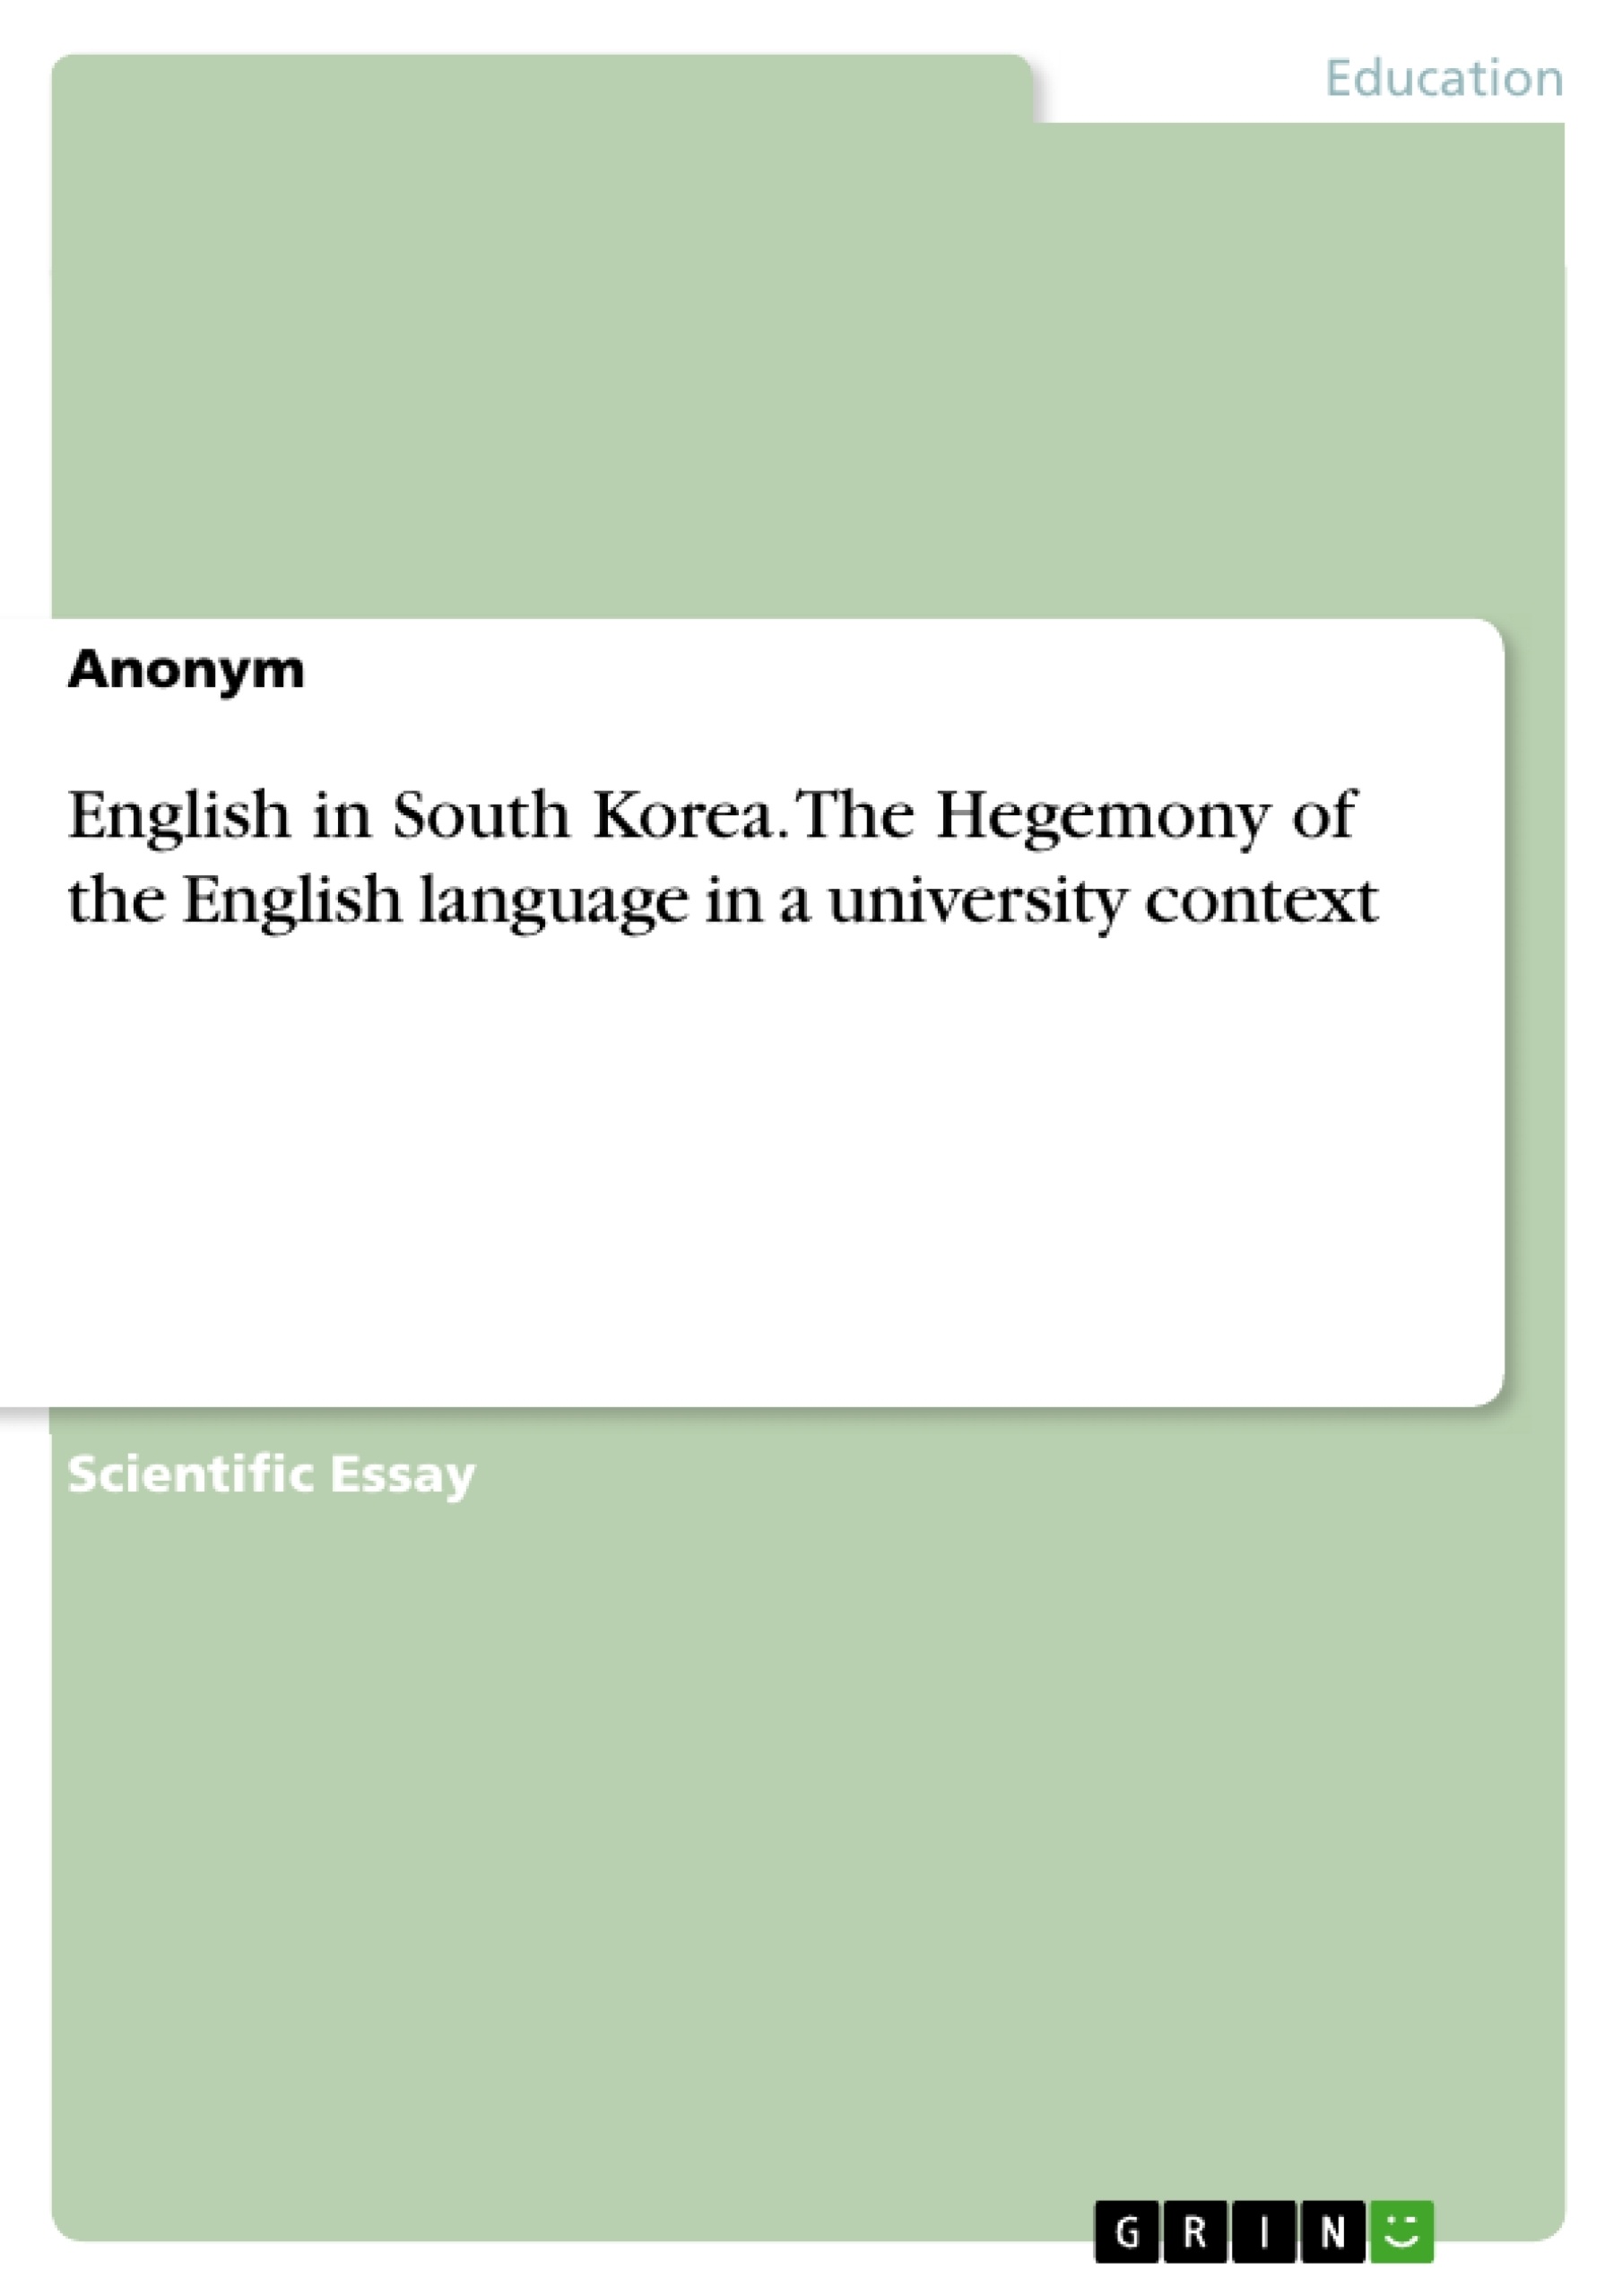 Title: English in South Korea. The Hegemony of the English language in a university context